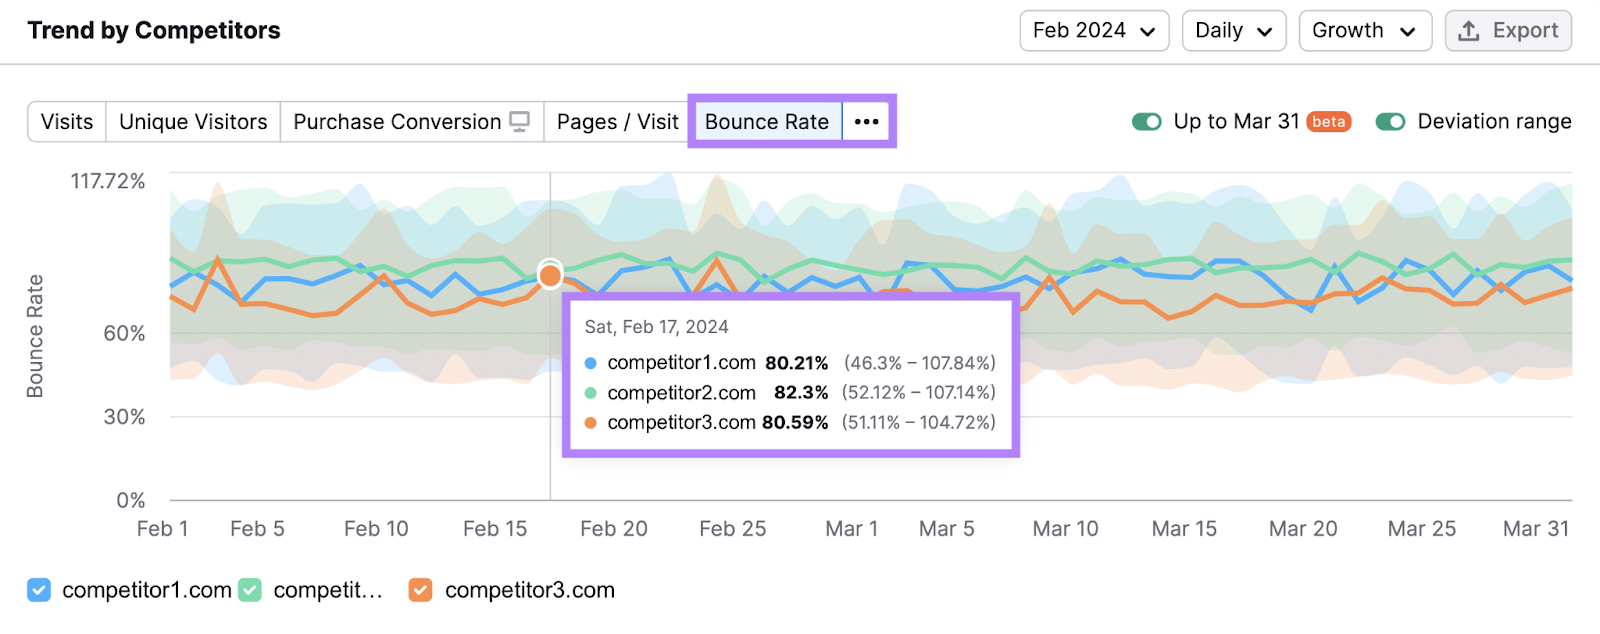 Bounce rate trend graphs in the "Trend by Competitors" section